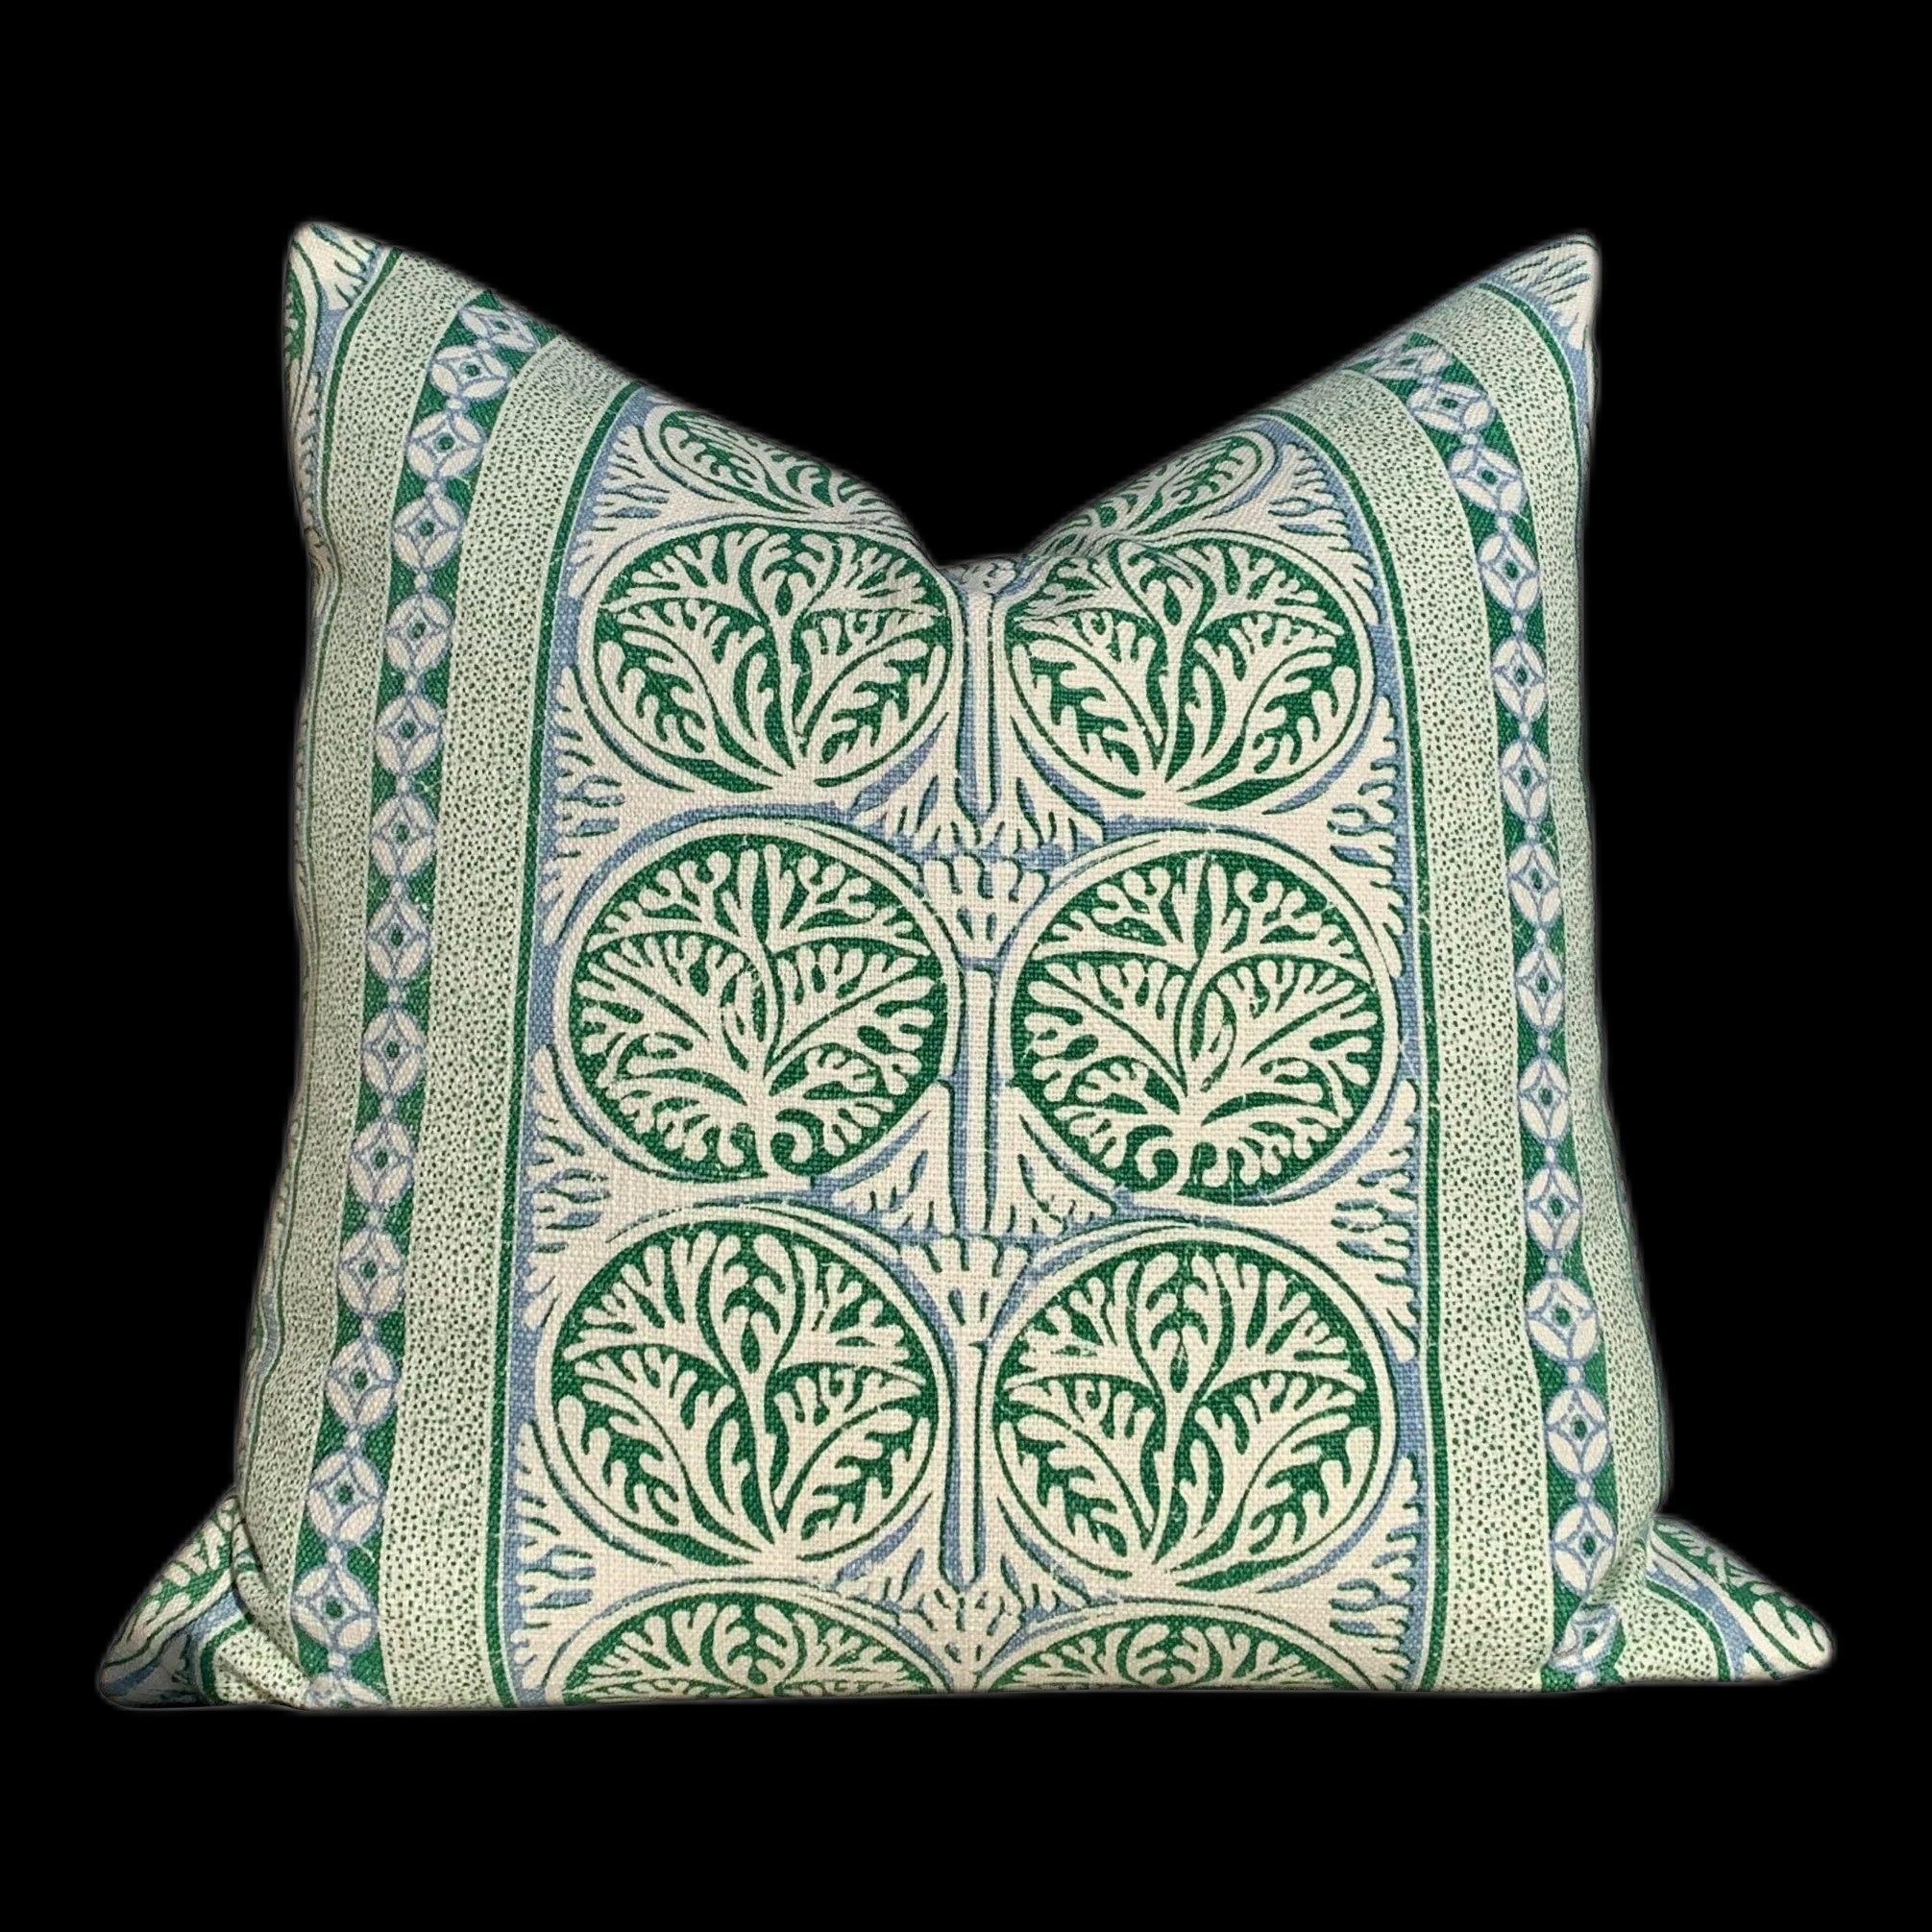 Thibaut Fair Isle Pillow in Green and Light Blue. Lumbar Striped  Pillow in Green and Blue Decorative Green Accent Cushion Cover for Sofa